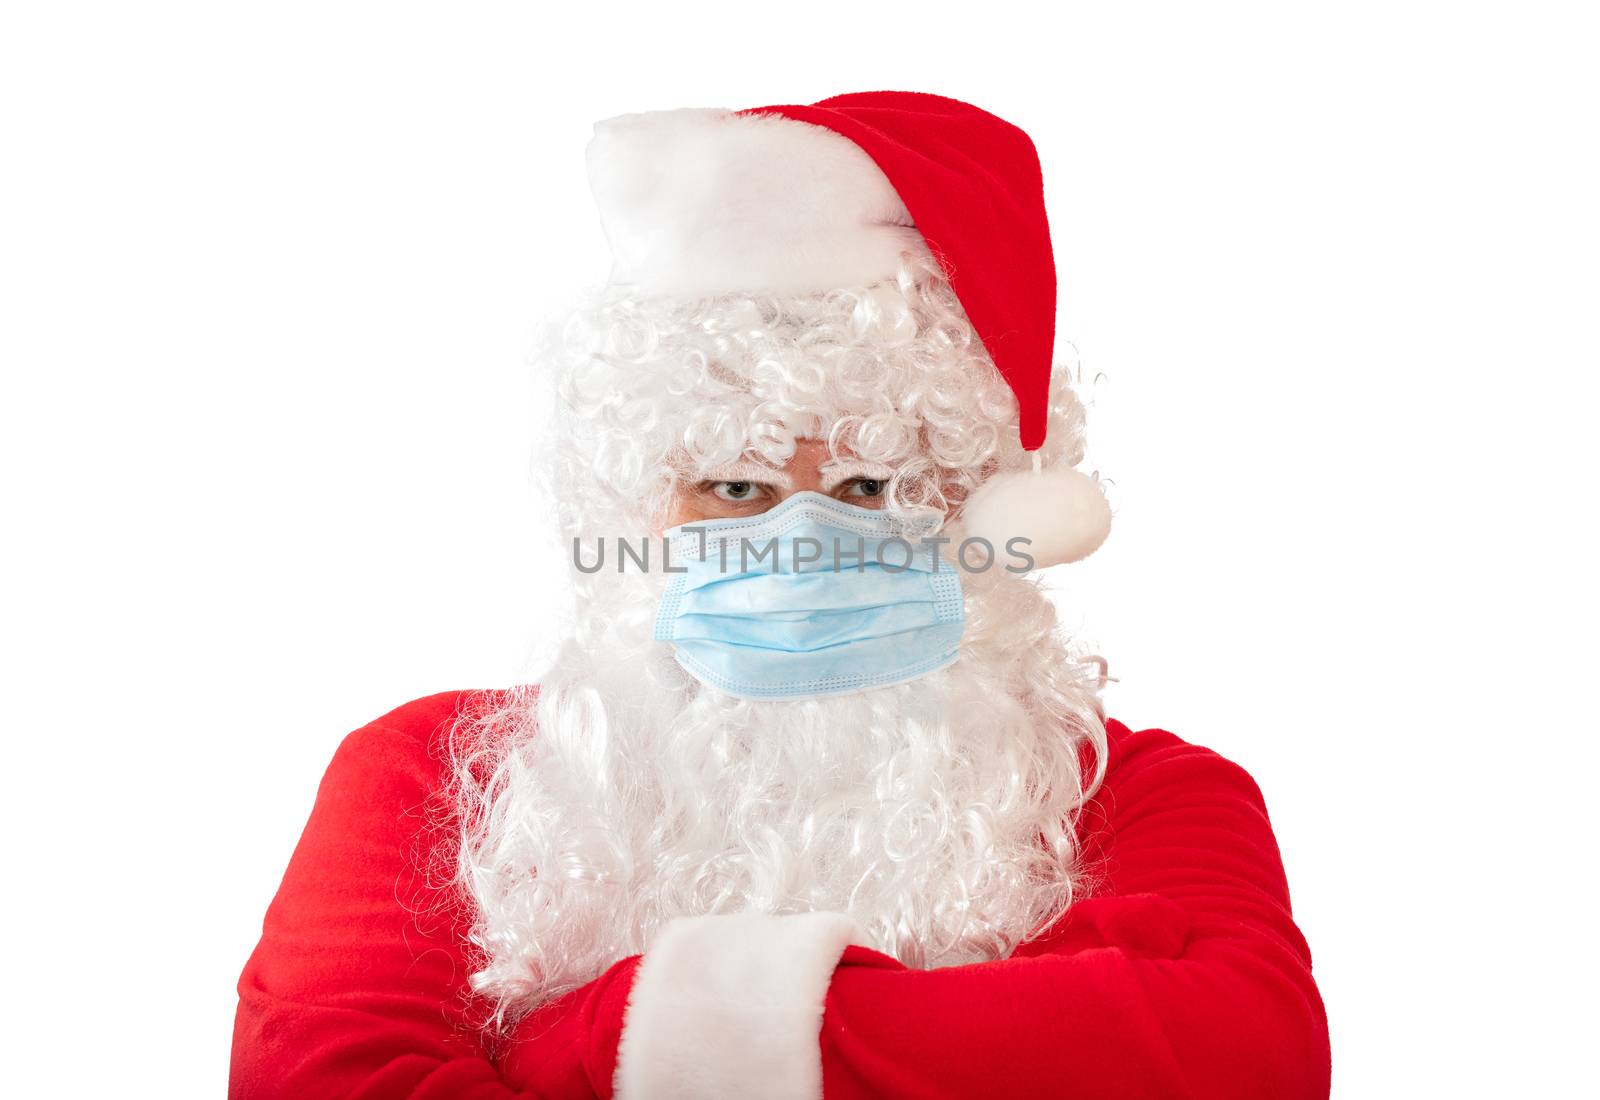 View of a man wearing a Santa Claus costume and medical mask with his arms crossed on his chest, isolated on white background. Man looks very angry. New normal, new reality, pandemic holiday concepts.